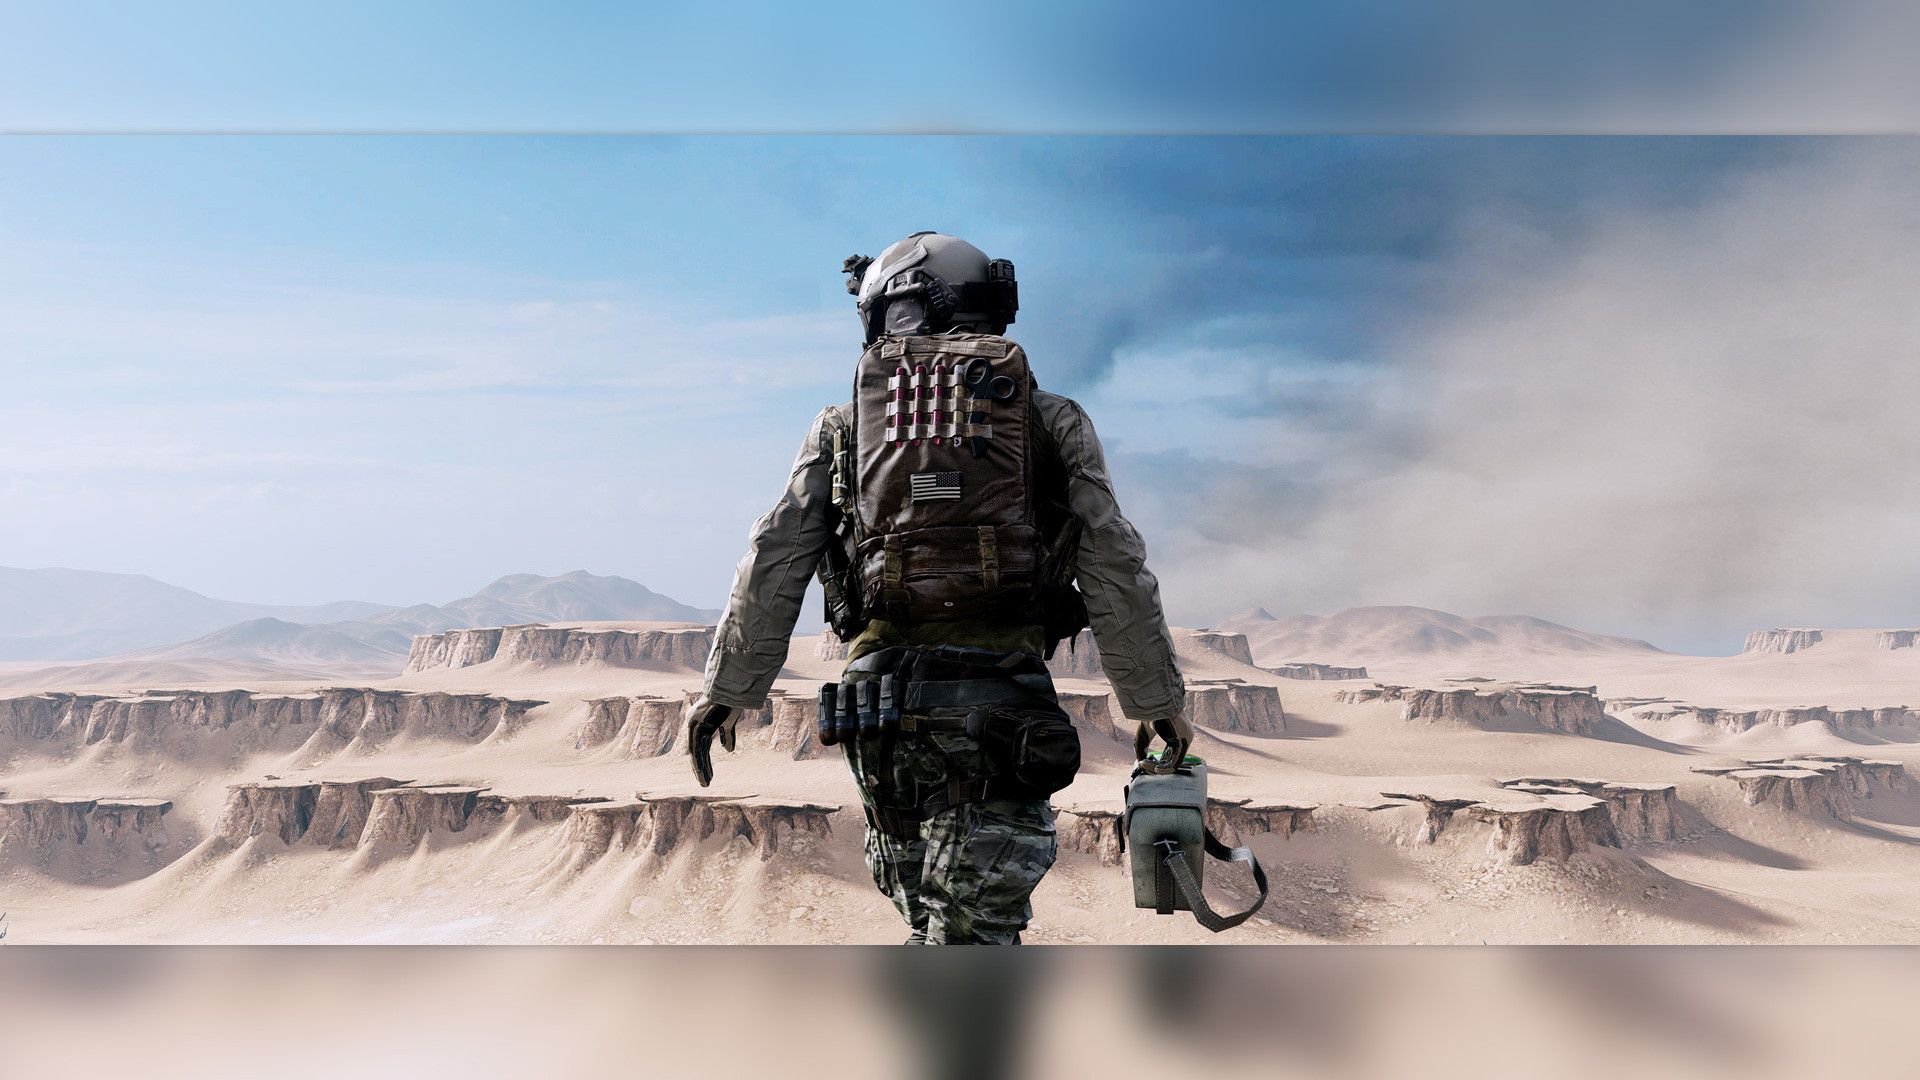 I made a few BF3 / BF4 Wallpapers for you guys, more in comments ...